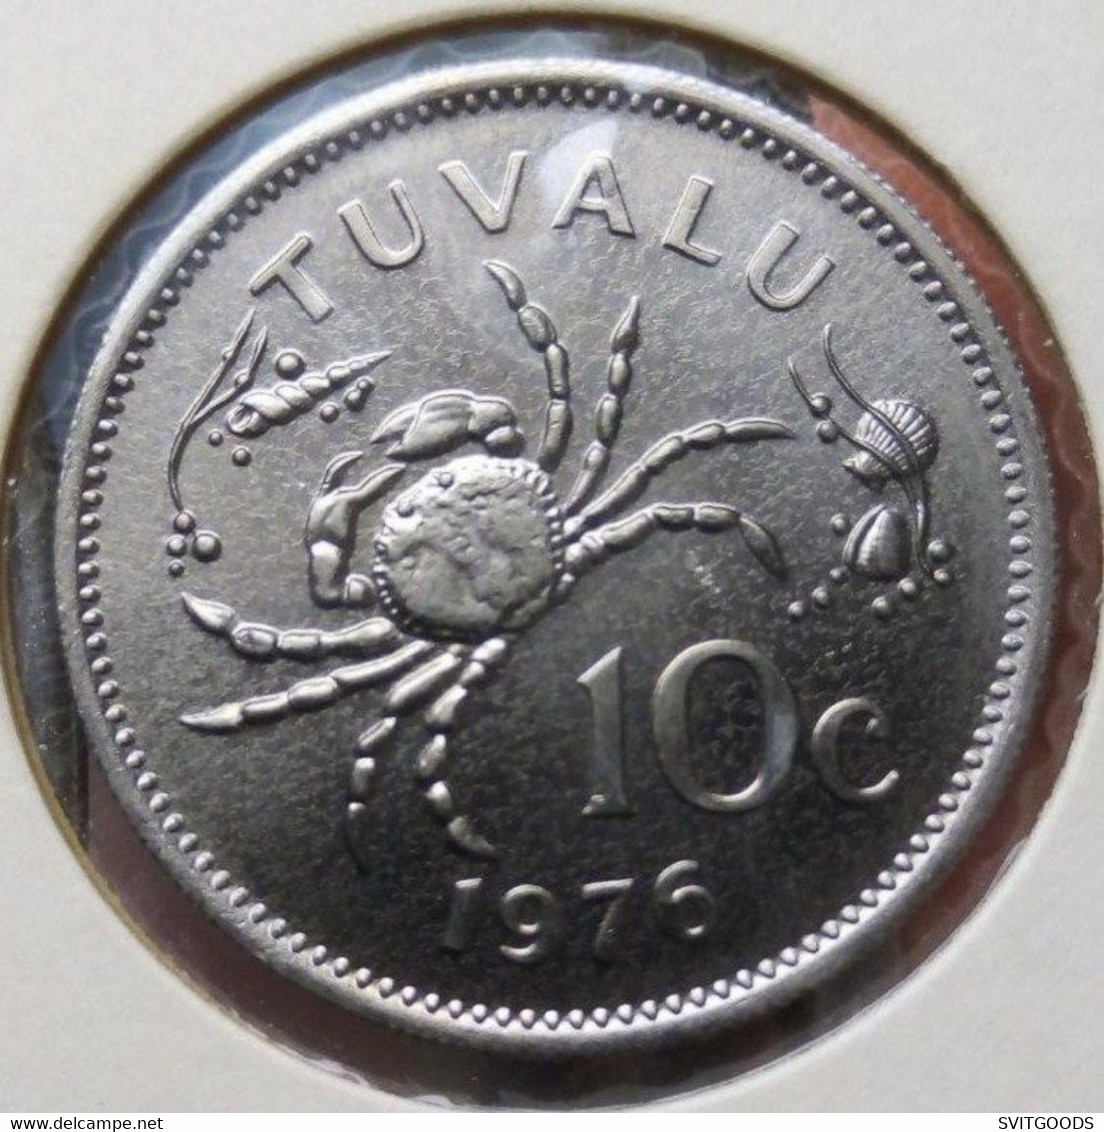 Tuvalu - TUVALU 5 DOLLARS 1976 SILVER PROOF Young bust right